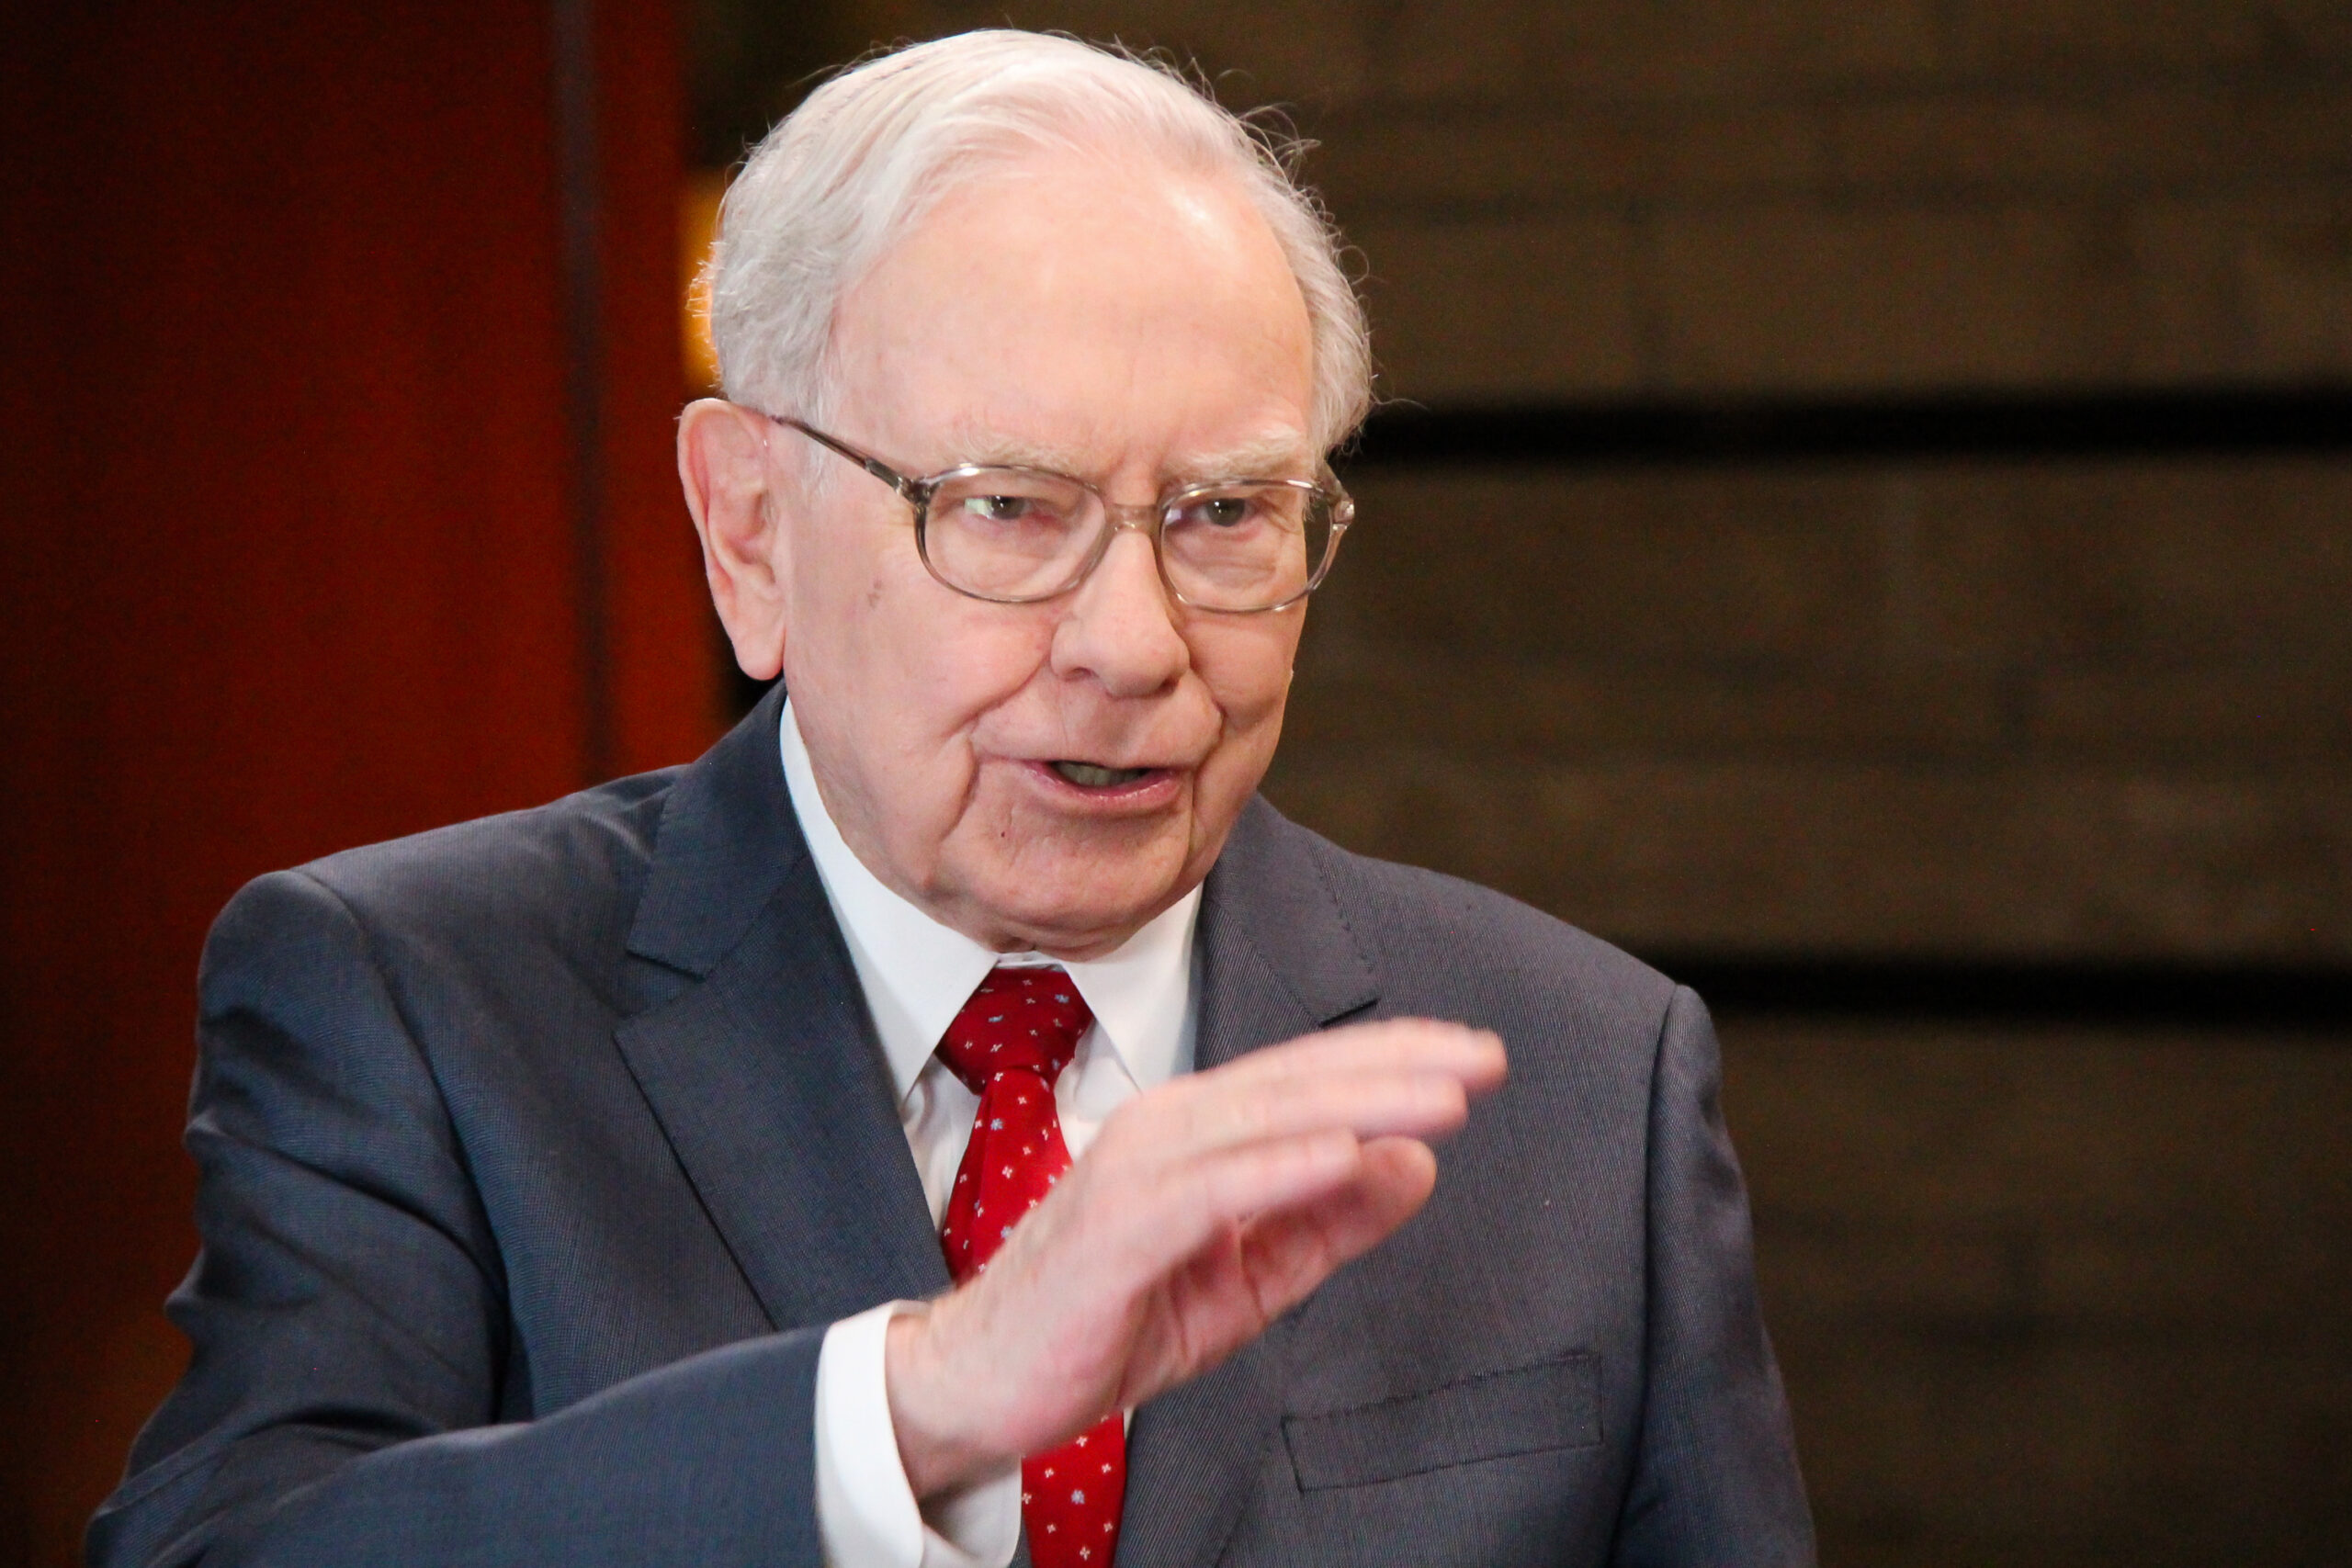 Berkshire Hathaway shareholders reject climate and diversity proposals.